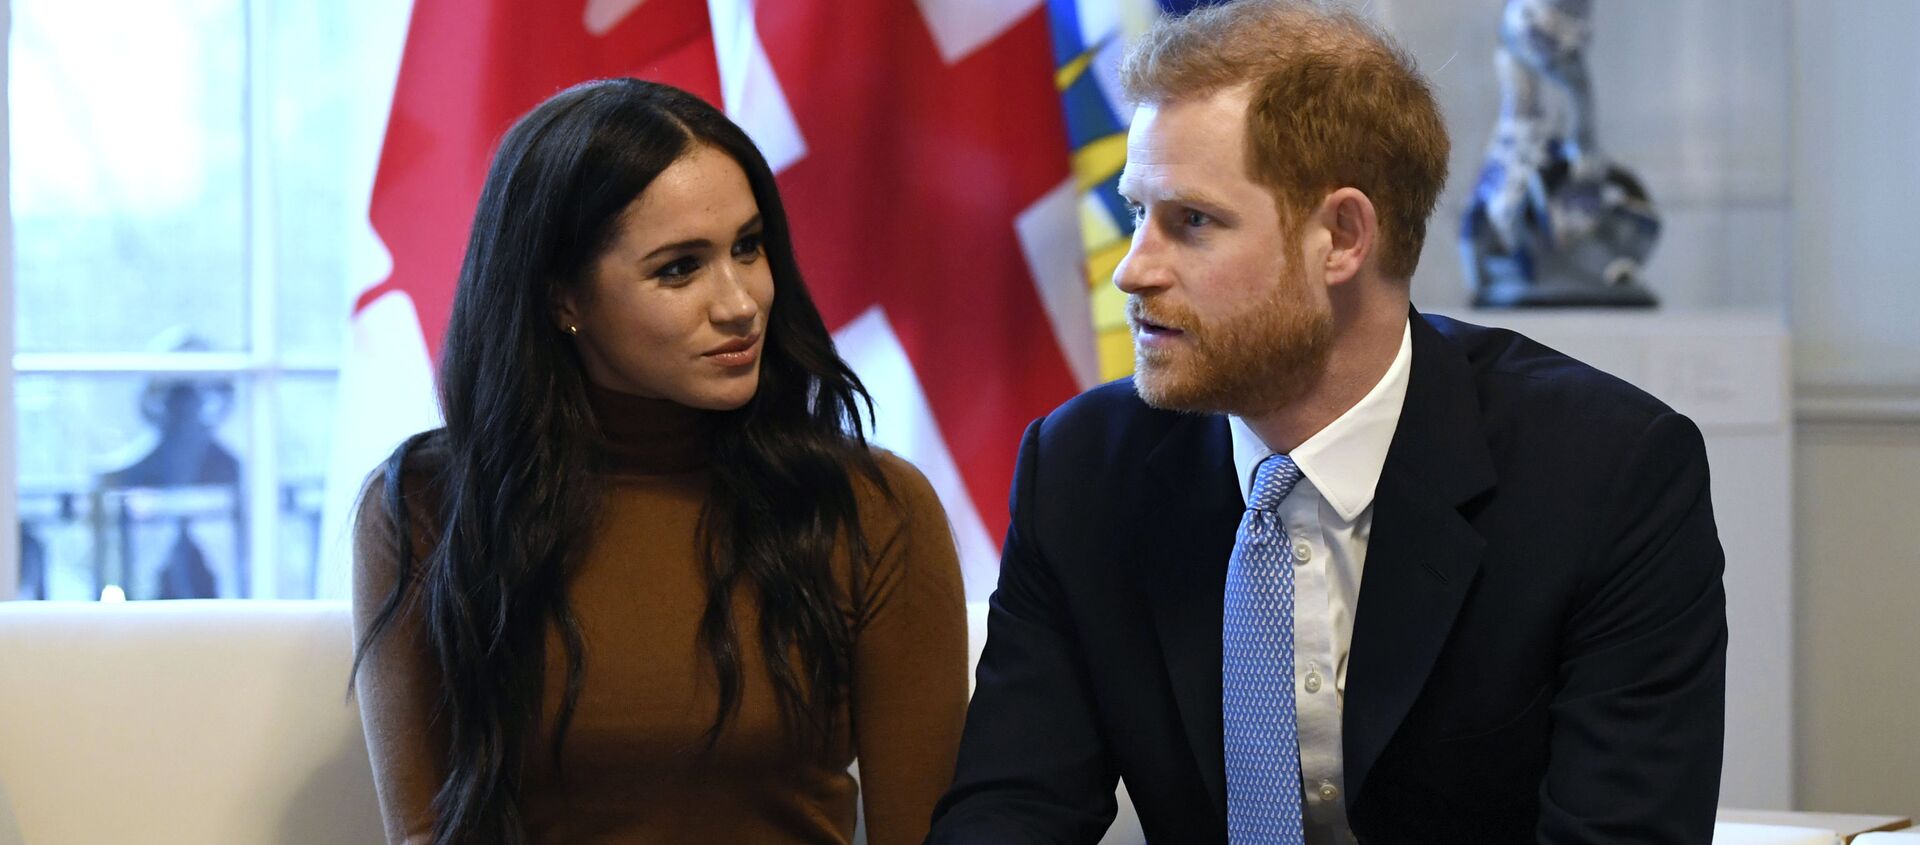 Britain's Prince Harry and Meghan, Duchess of Sussex gesture during their visit to Canada House, thanking the warm Canadian hospitality and support they received during their recent stay in Canada, in London, 7 January 2020 - Sputnik International, 1920, 23.03.2021